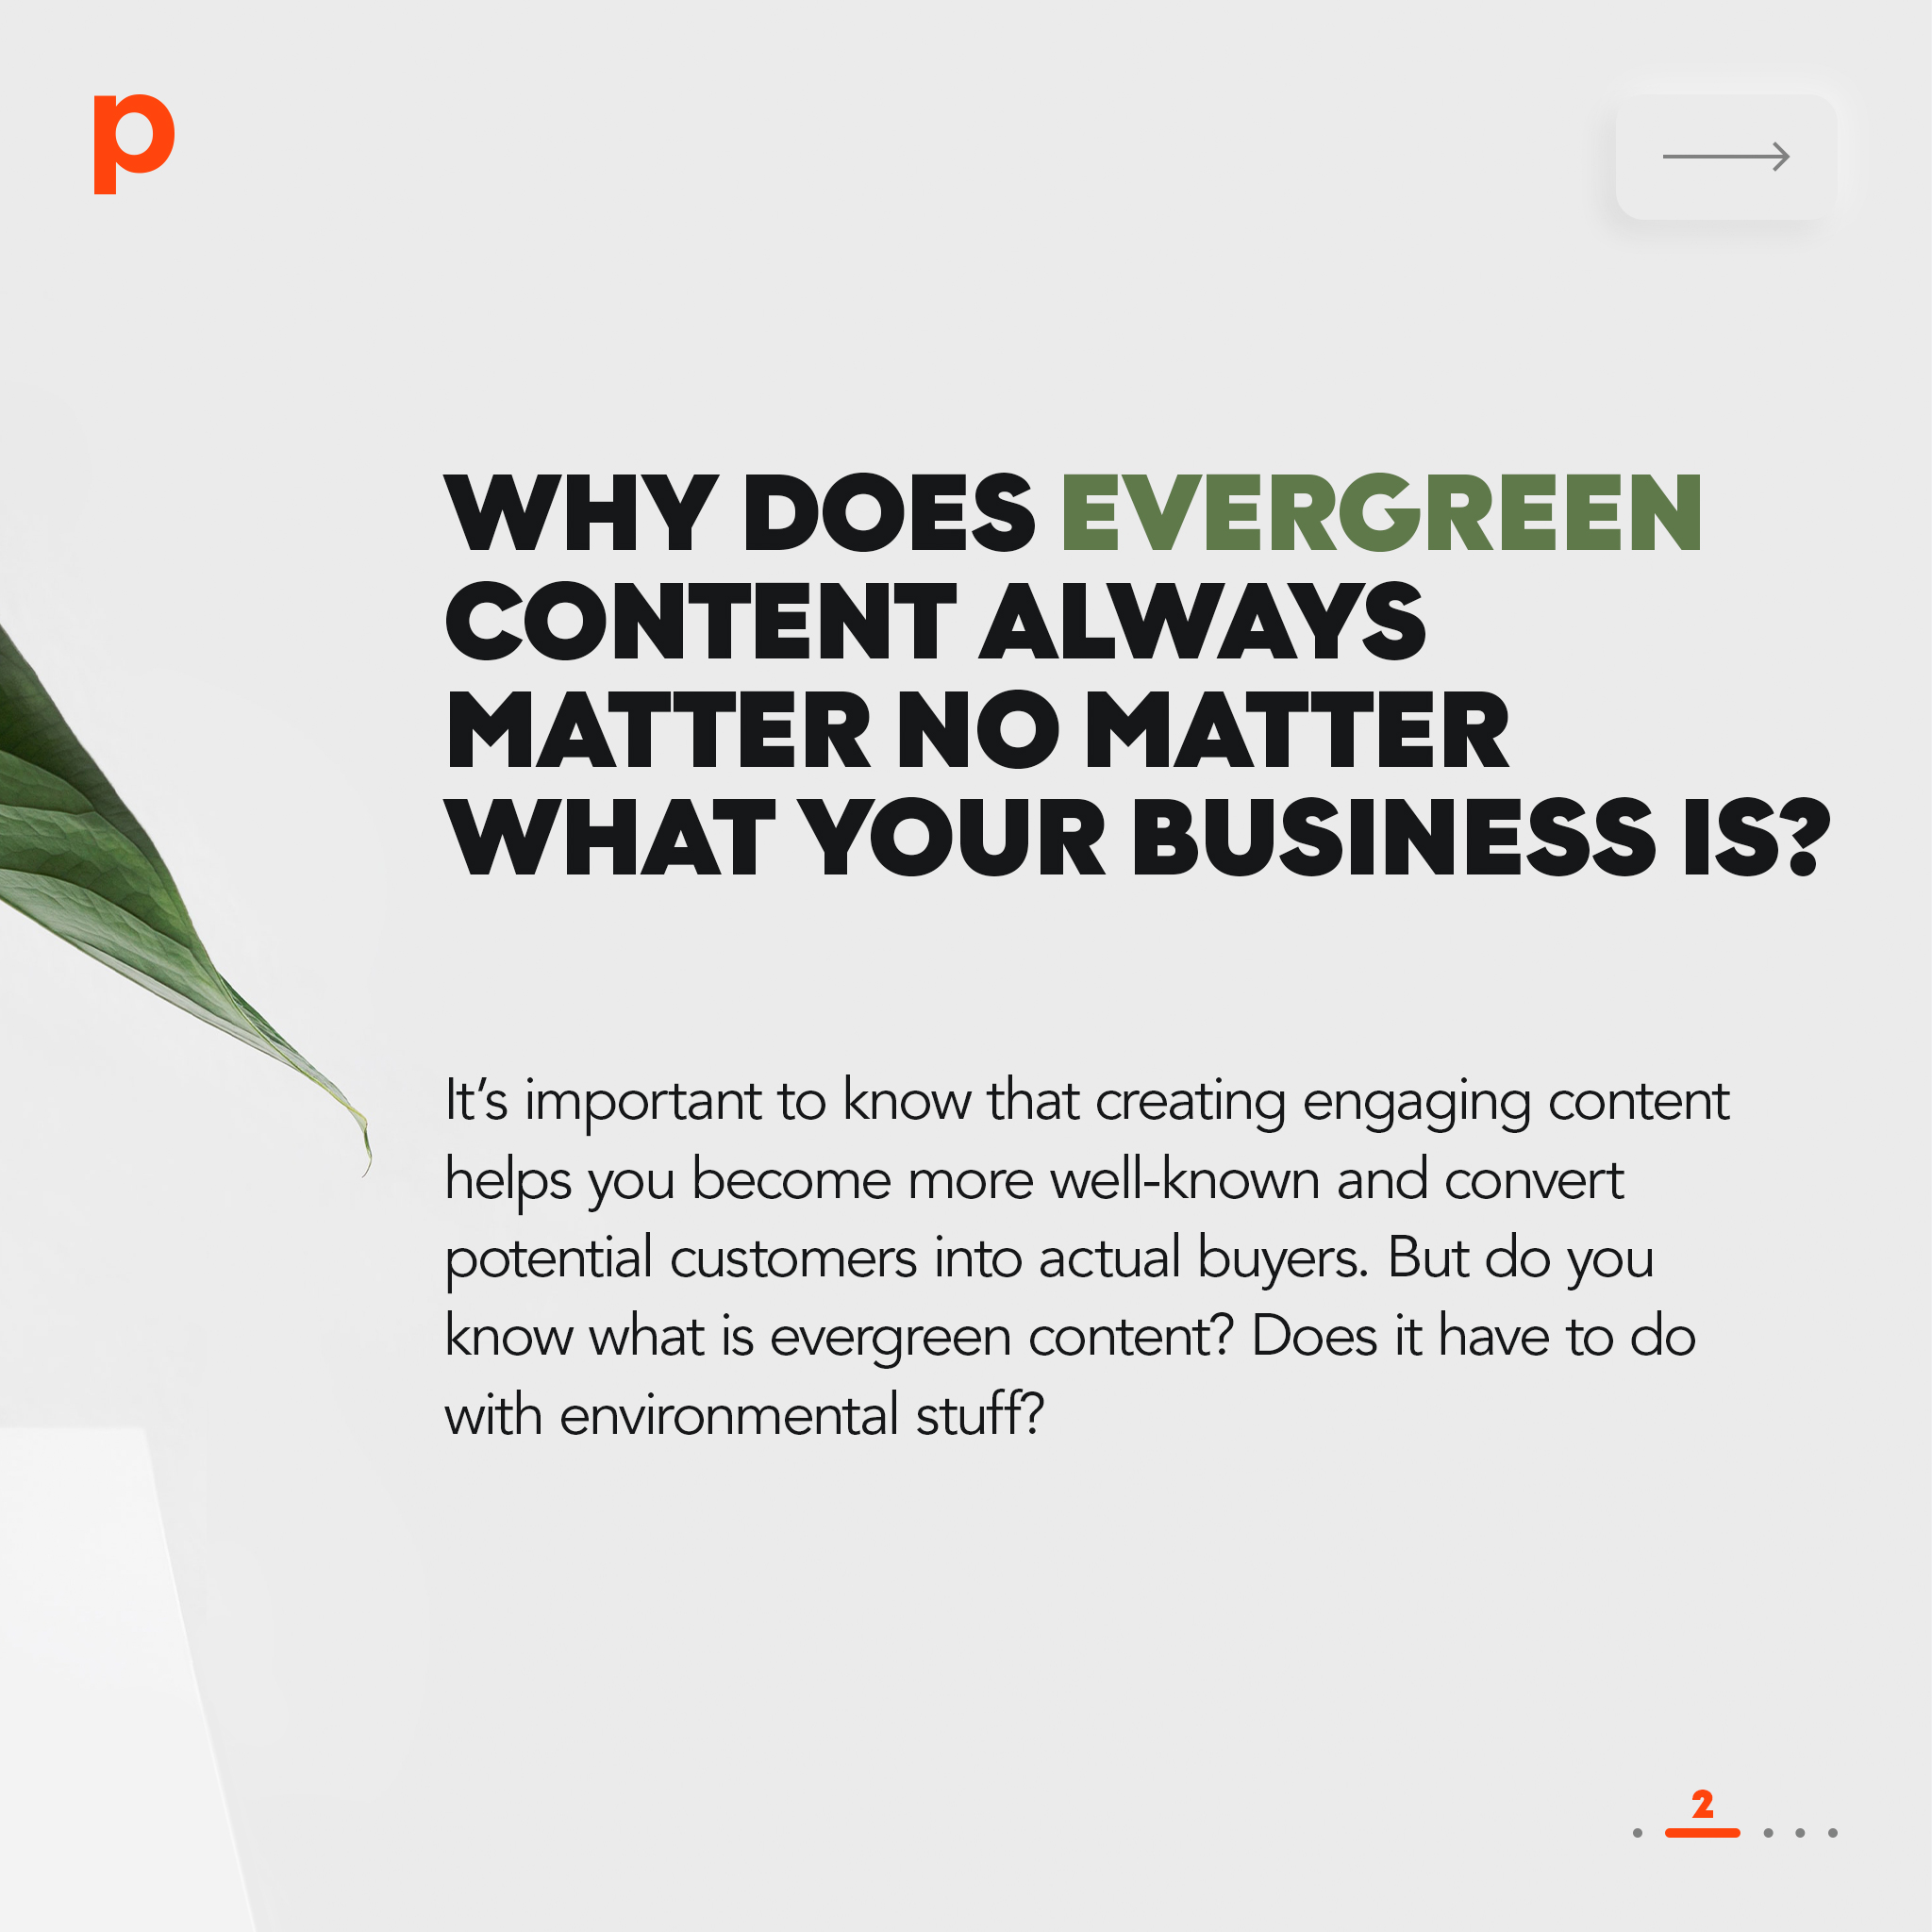 Why does evergreen content always matter no matter what your business is?